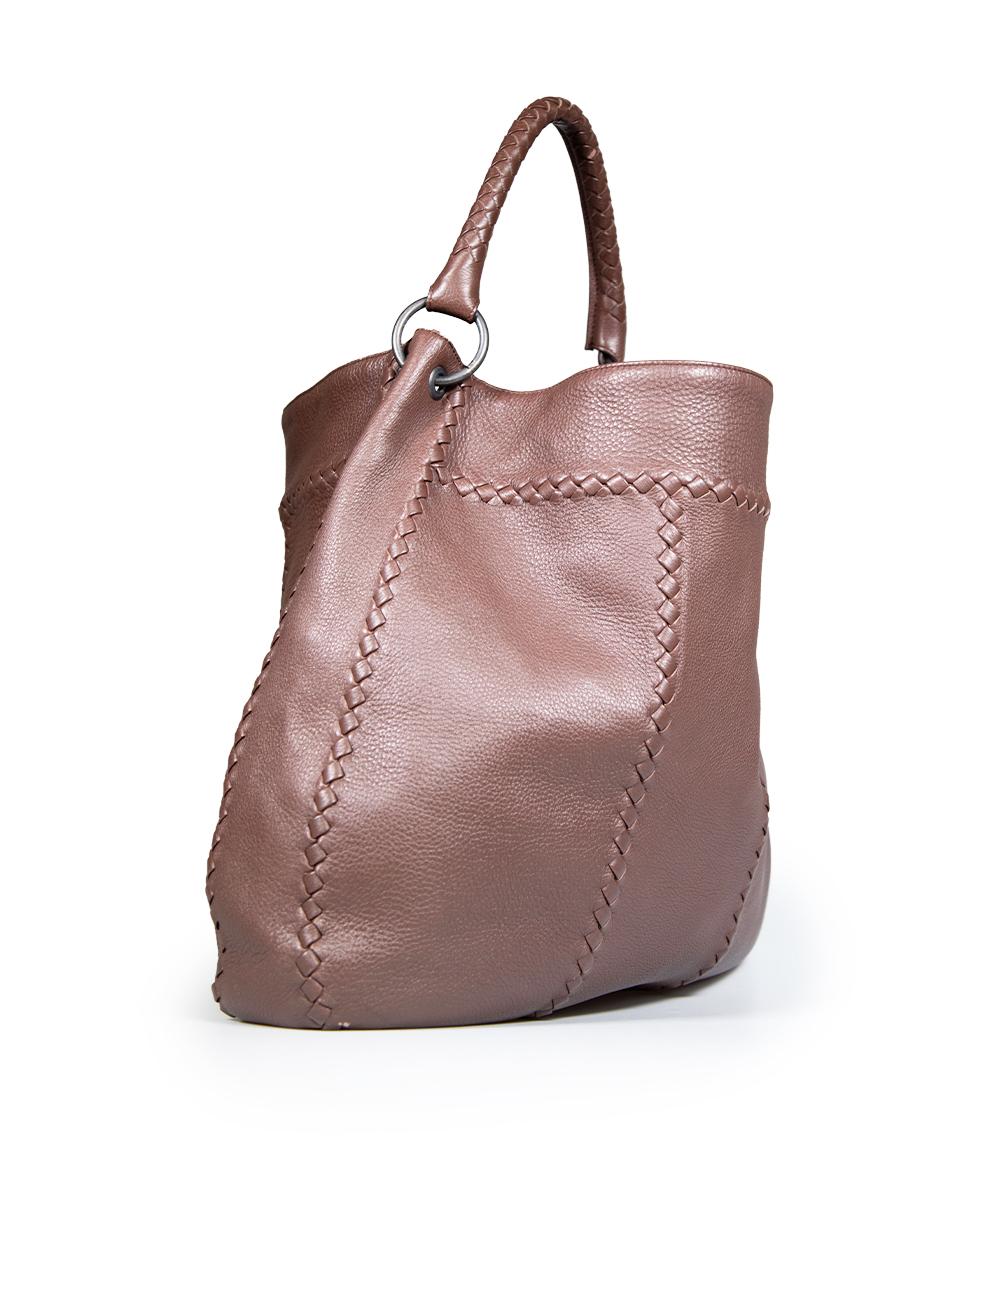 CONDITION is Very good. Minimal wear to the bag is evident. Small abrasions to handle strap, top sides, rear top, rear bottom and bottom. Light tarnishing to hardware on this used Bottega Veneta designer resale item.
 
 
 
 Details
 
 
 Brown
 
